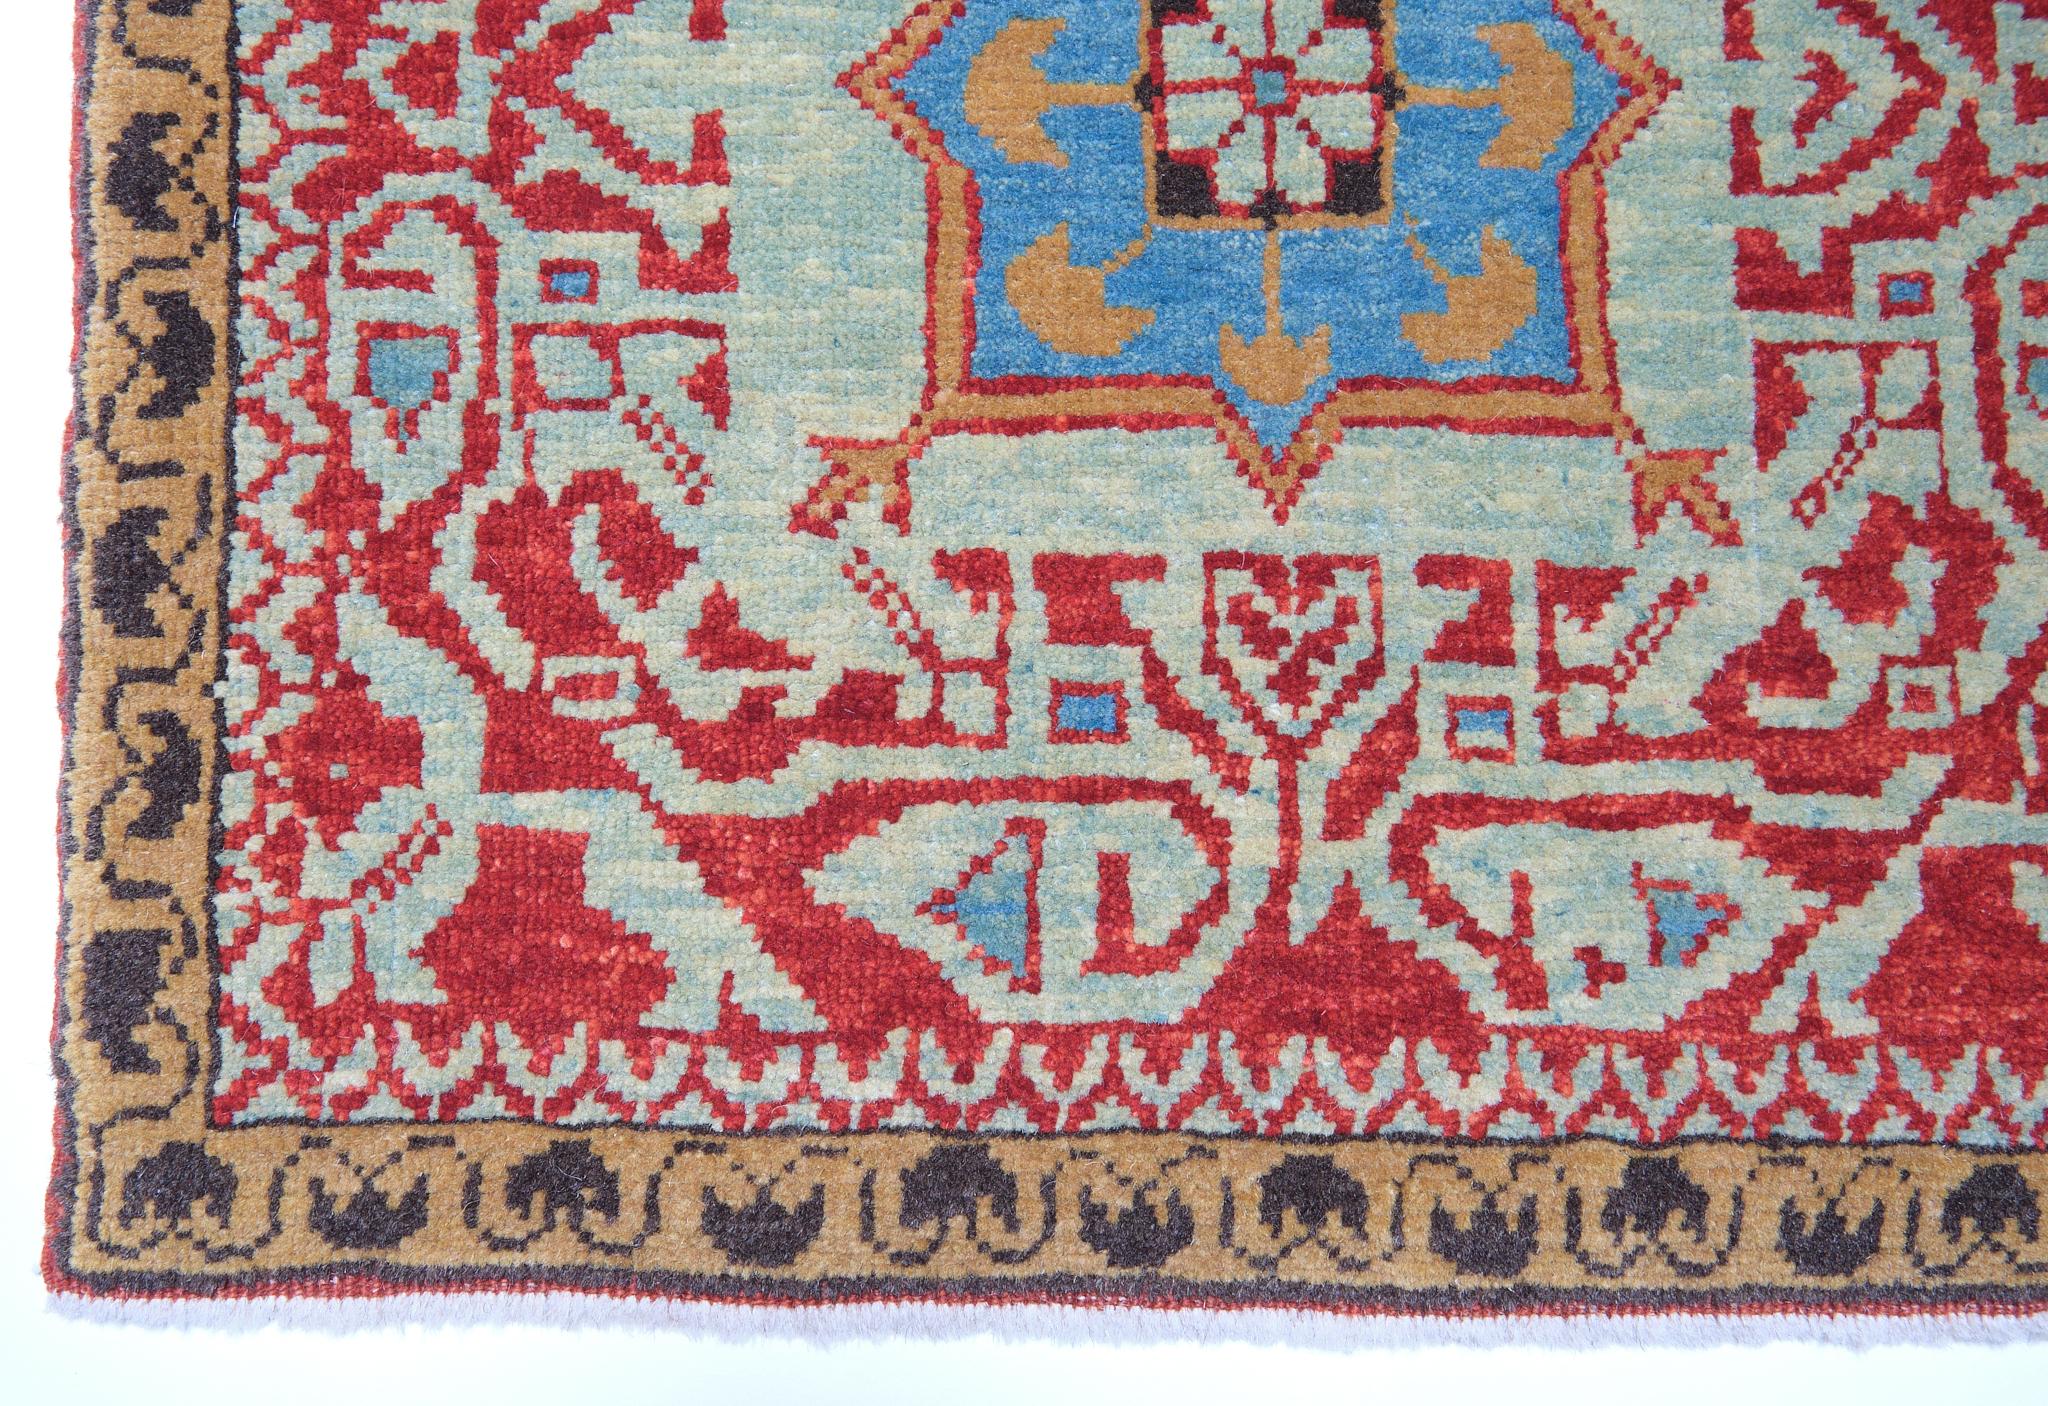 The source of the rug comes from the Baillet-Latour Mamluk Carpet, Vienna Book(1892) and Sarre-Trenkwald(1926, pl.48). That carpet was designed in the early 16th-century rug by Mamluk Sultane of Cairo, Egypt. It was sold at Christie’s London on 8